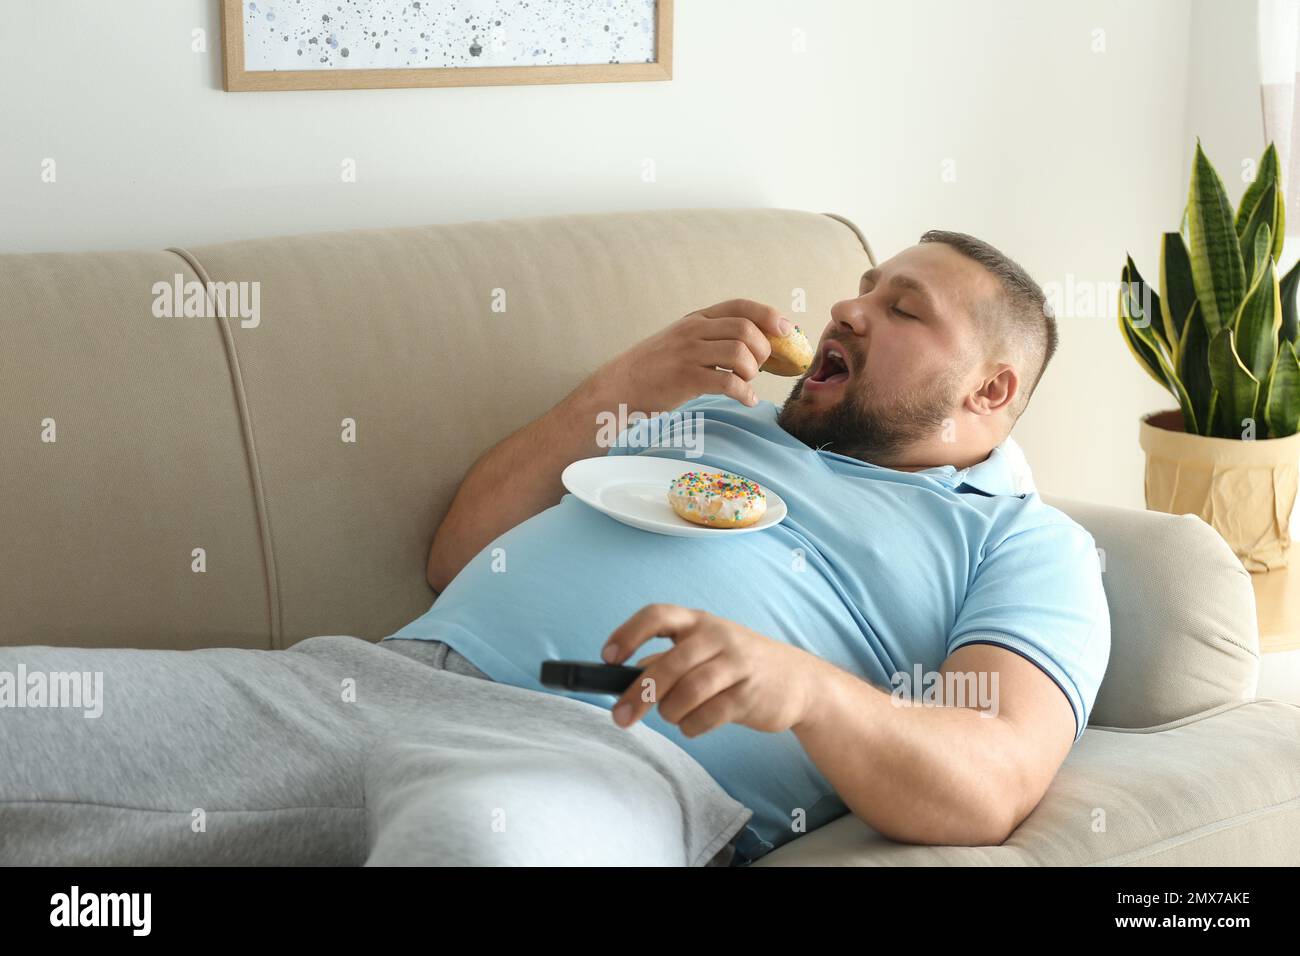 Lazy overweight man with donuts watching TV on sofa at home Stock Photo